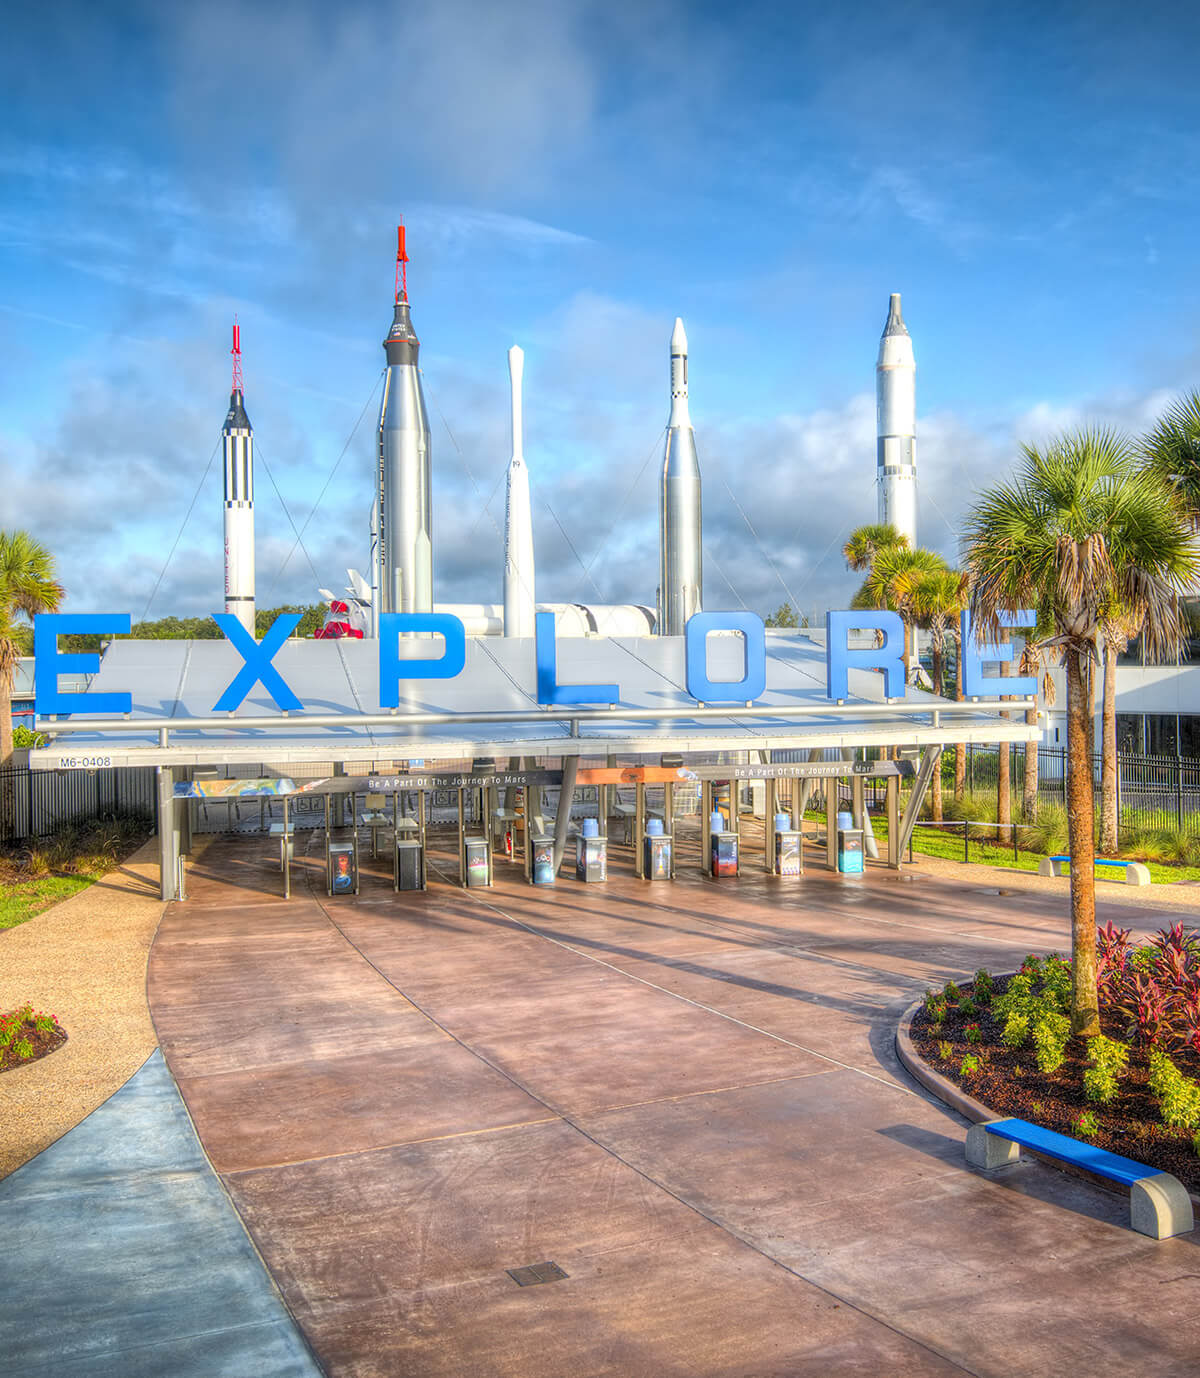 how many hours to visit kennedy space center